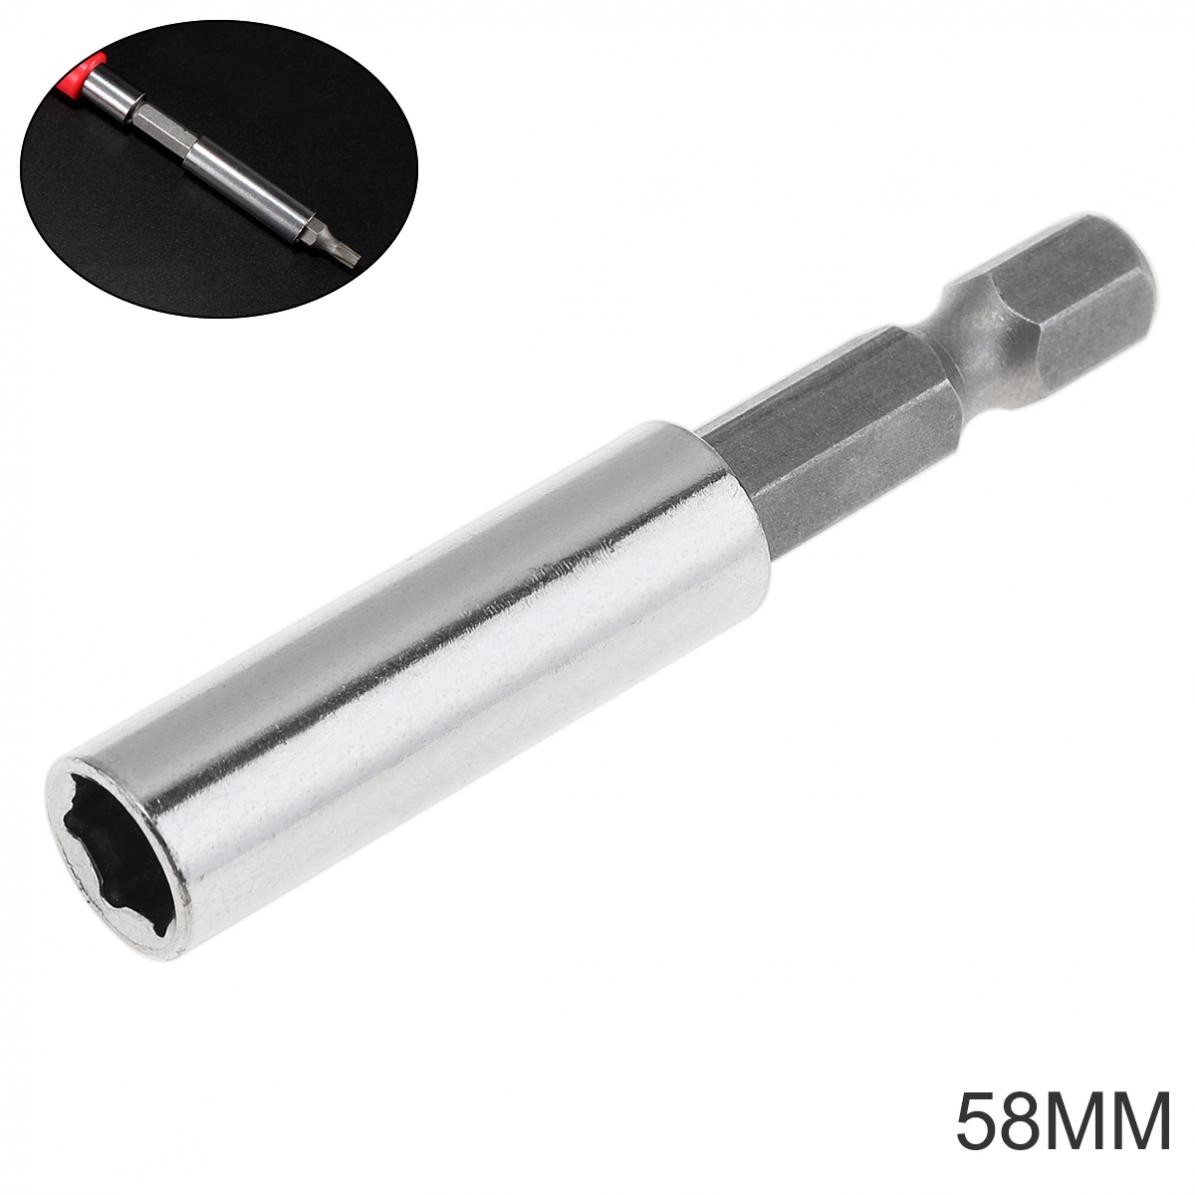 Screwdriver bits extension rod, 58mm hex shank, with magnetic positioning extension